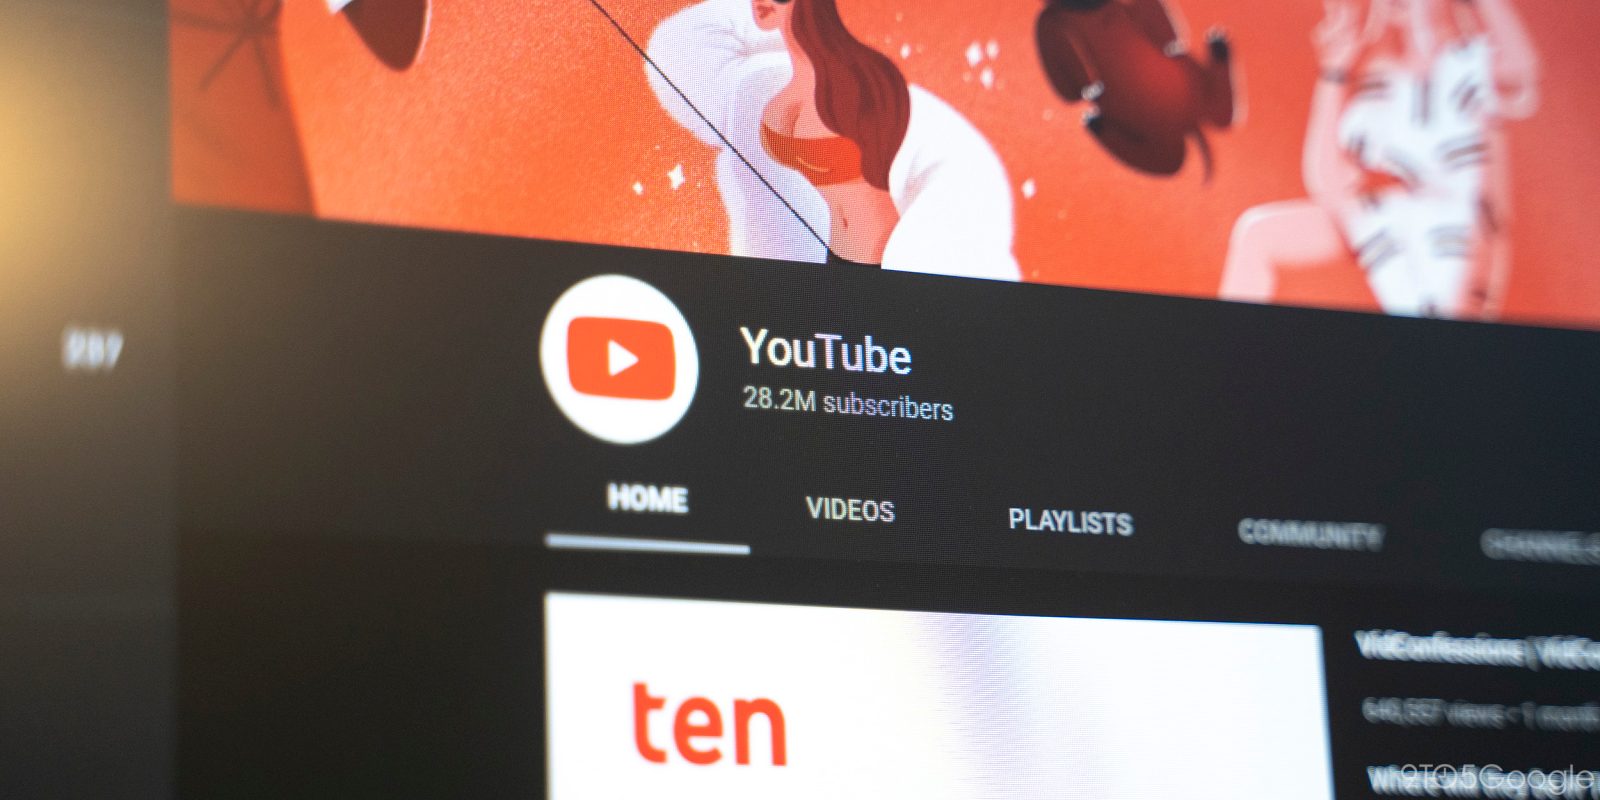 YouTube is removing verification badges from channels as requirements